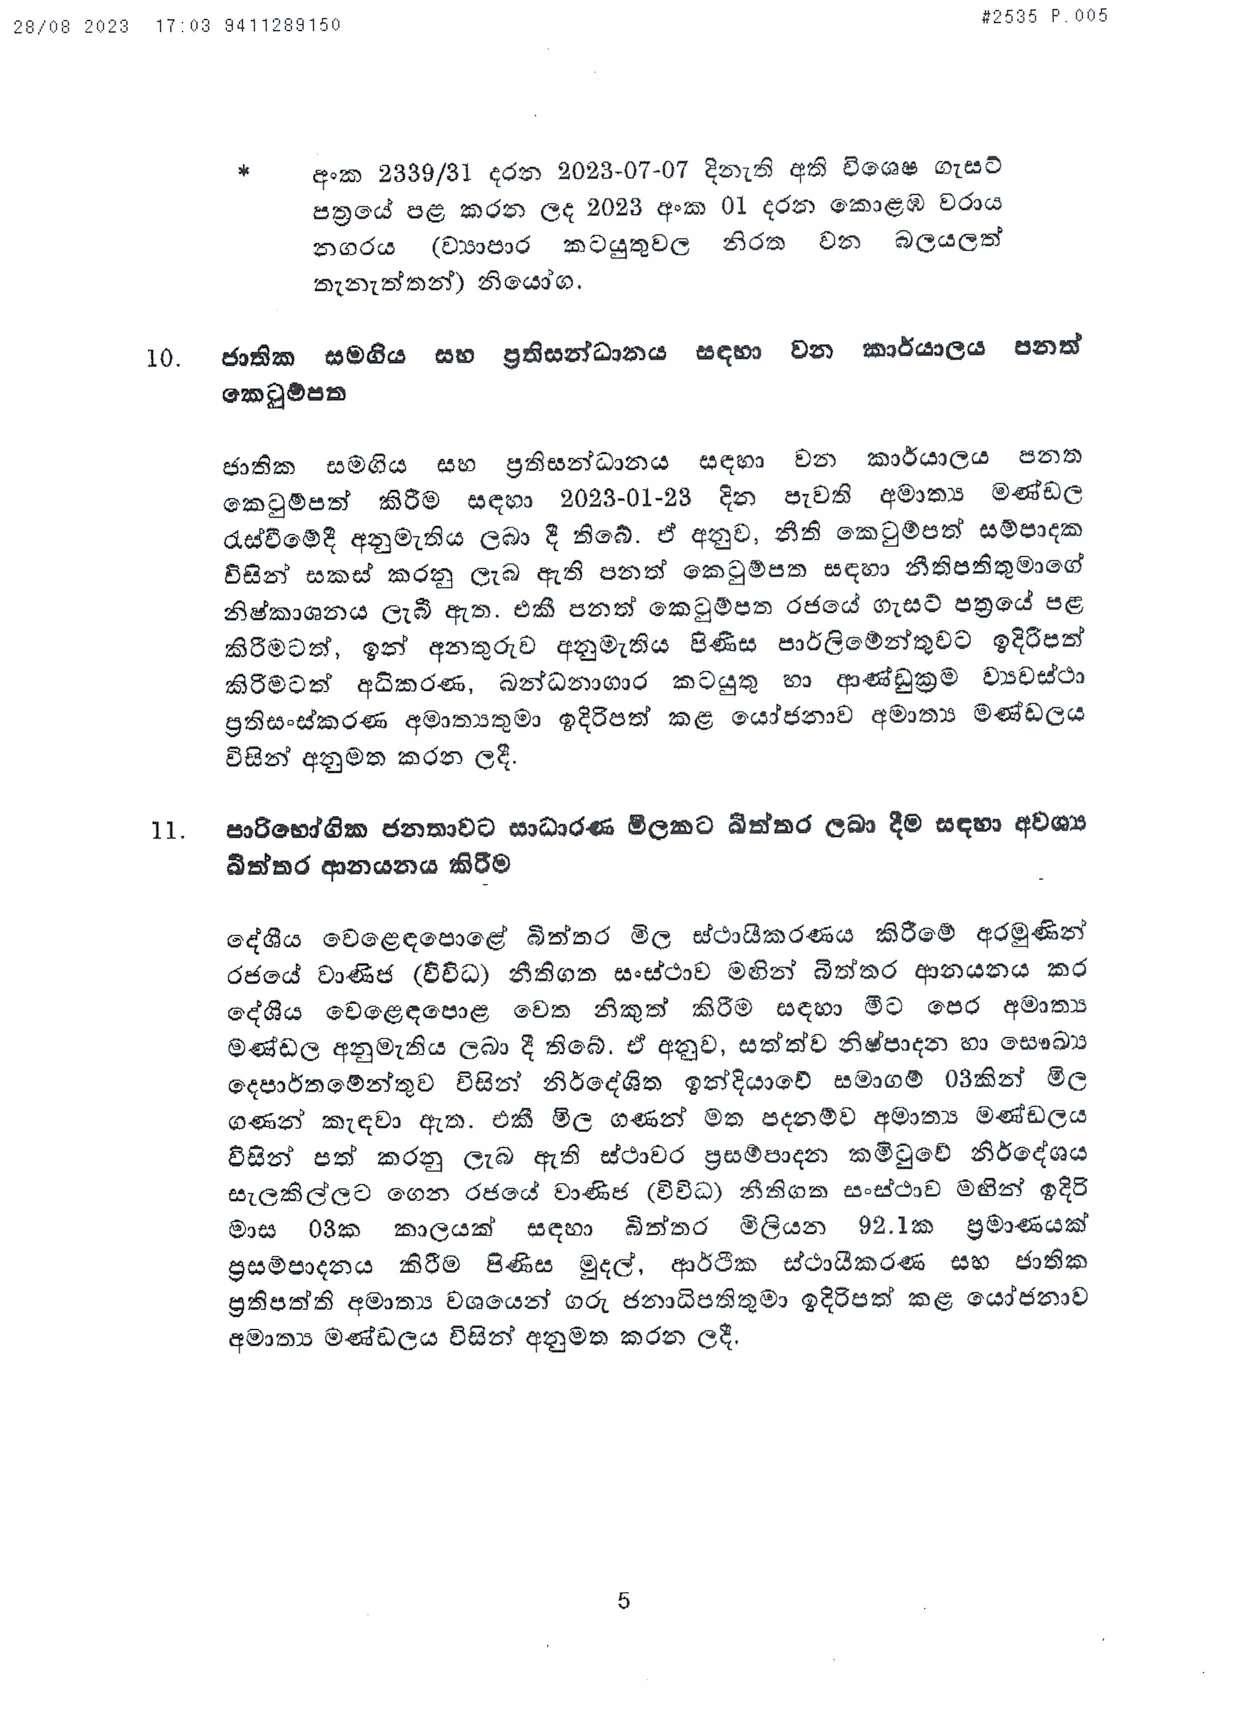 Cabinet Decision on 28.08.2023 1 page 005